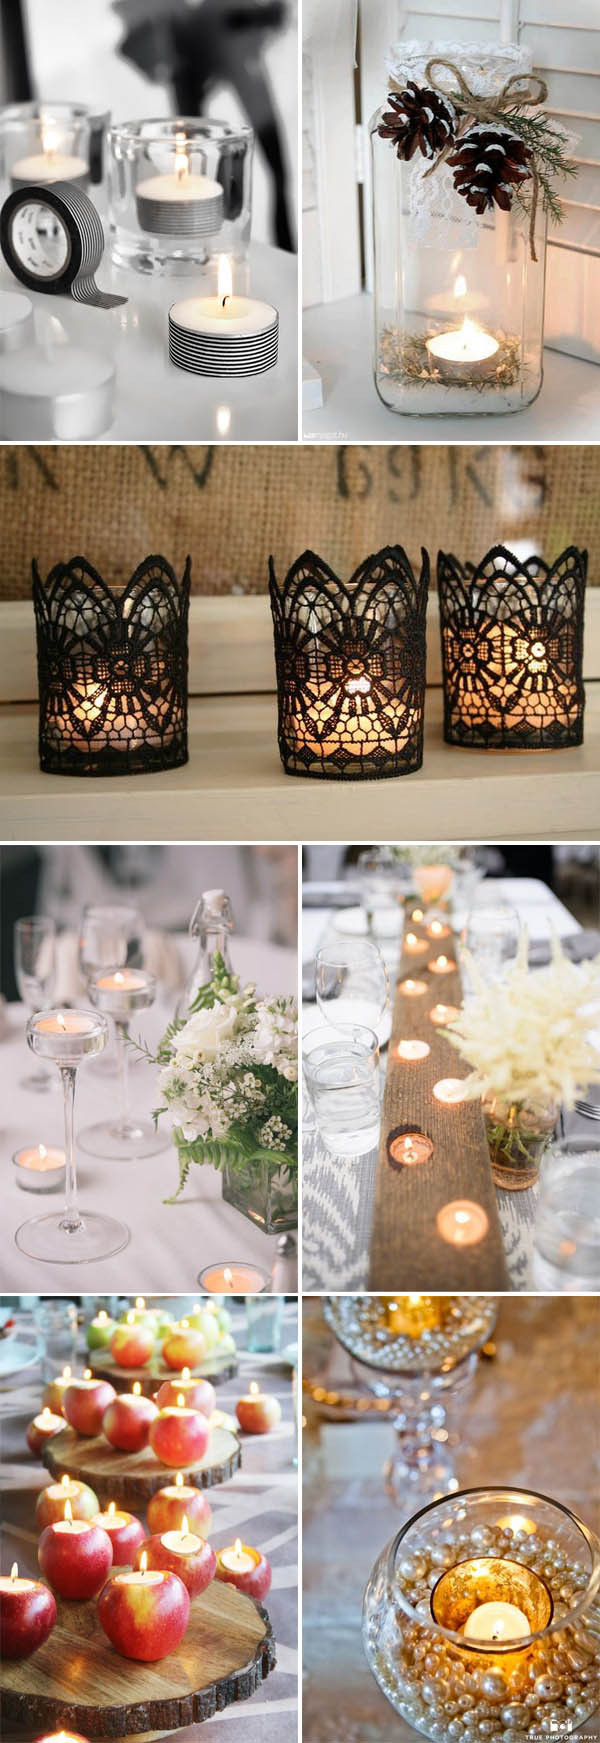 Cheap Wedding Decorations DIY
 Cheap Decorative Candle Wedding Favors and DIY Candle